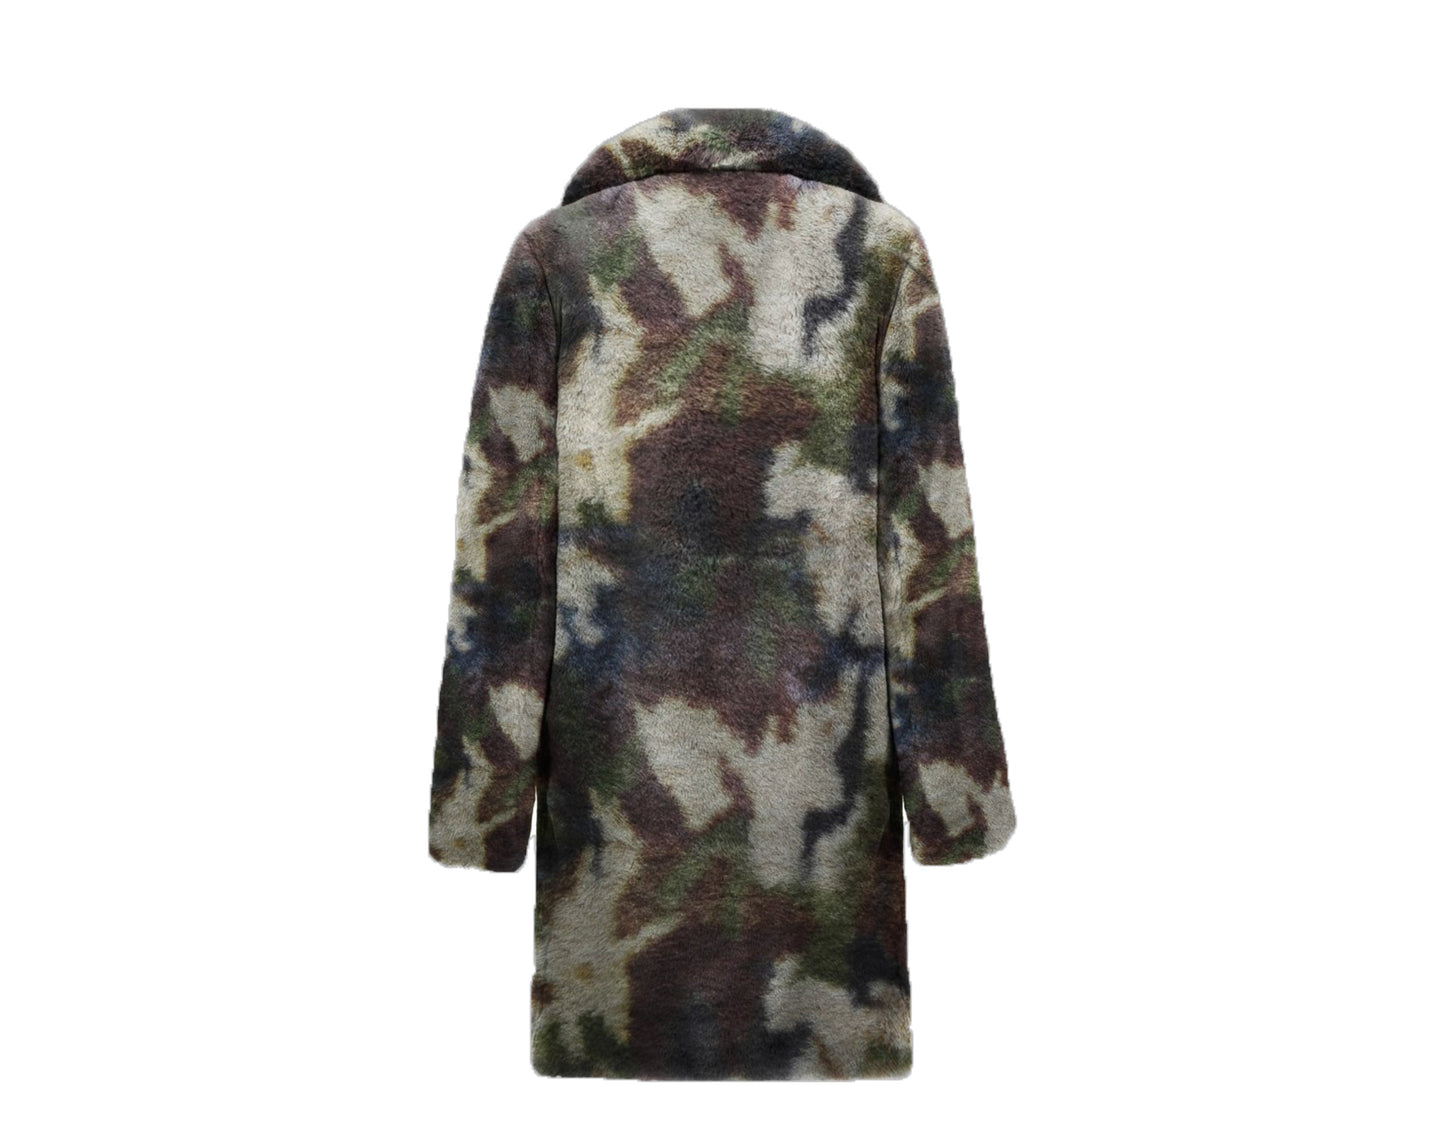 Invicta Tracy Long Faux Fur Military Camouflage Women's Coat 4444005D-037